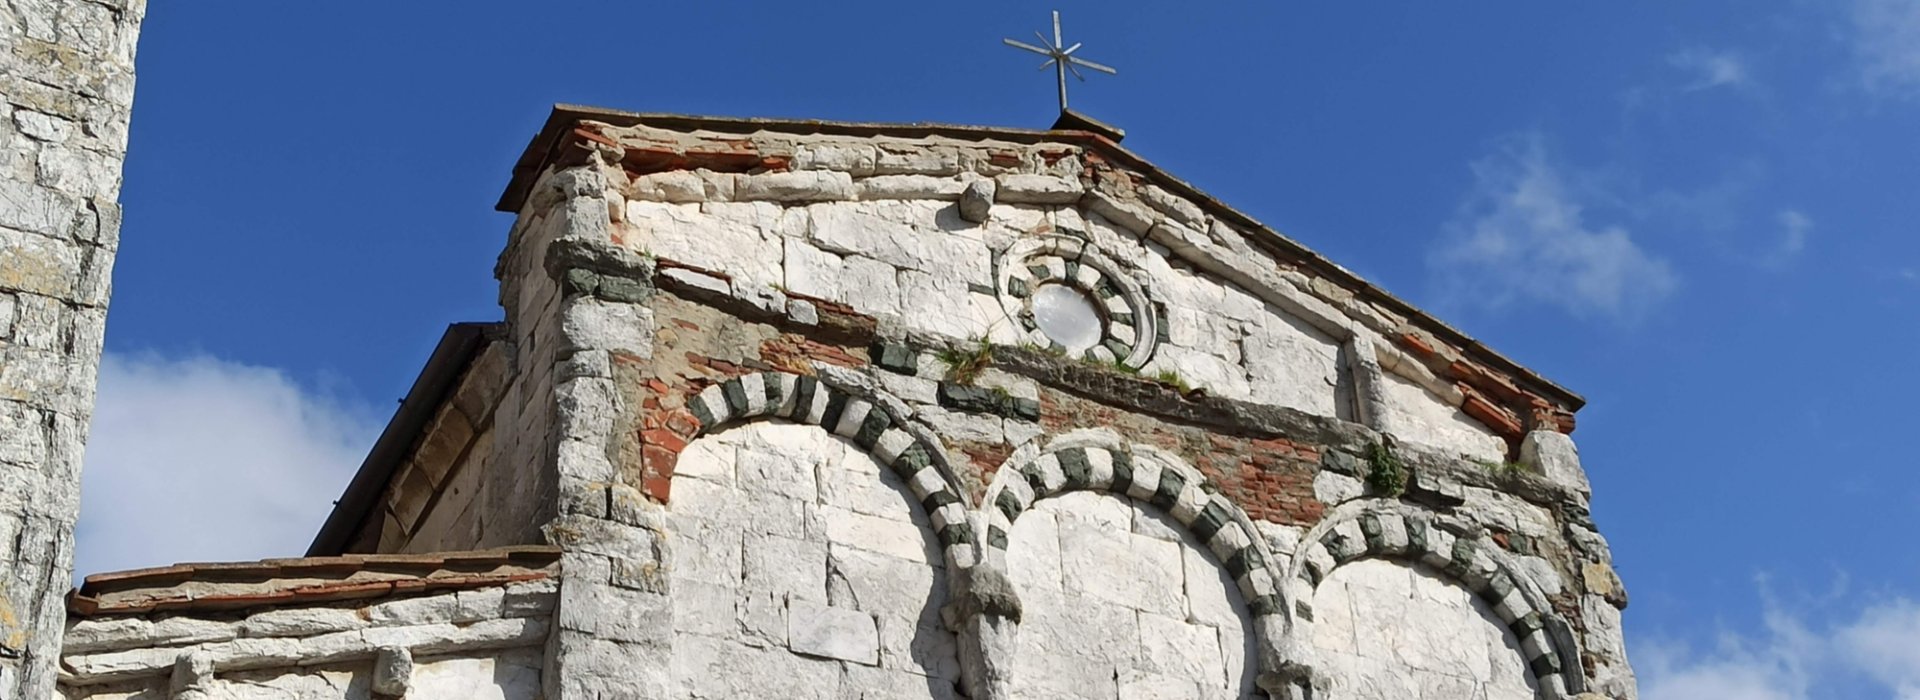 Two days E-bike itinerary to discover the Romanesque parish churches and the rural landscape of Monte Pisano